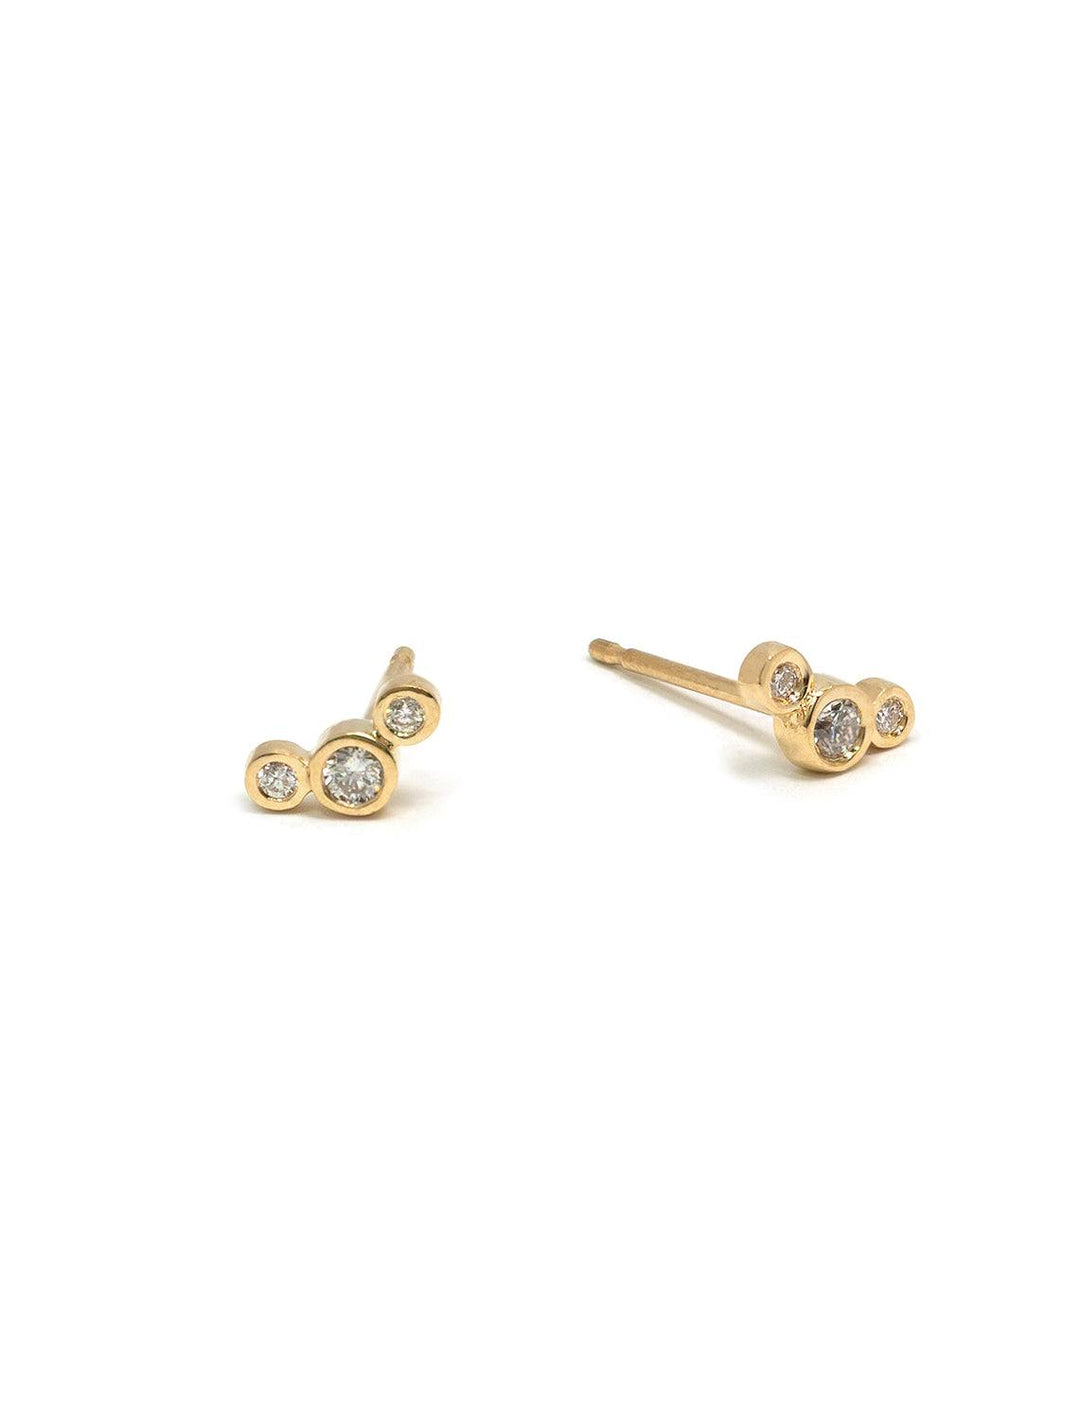 Front view of Zoe Chicco's 14k 3 diamond curved studs.